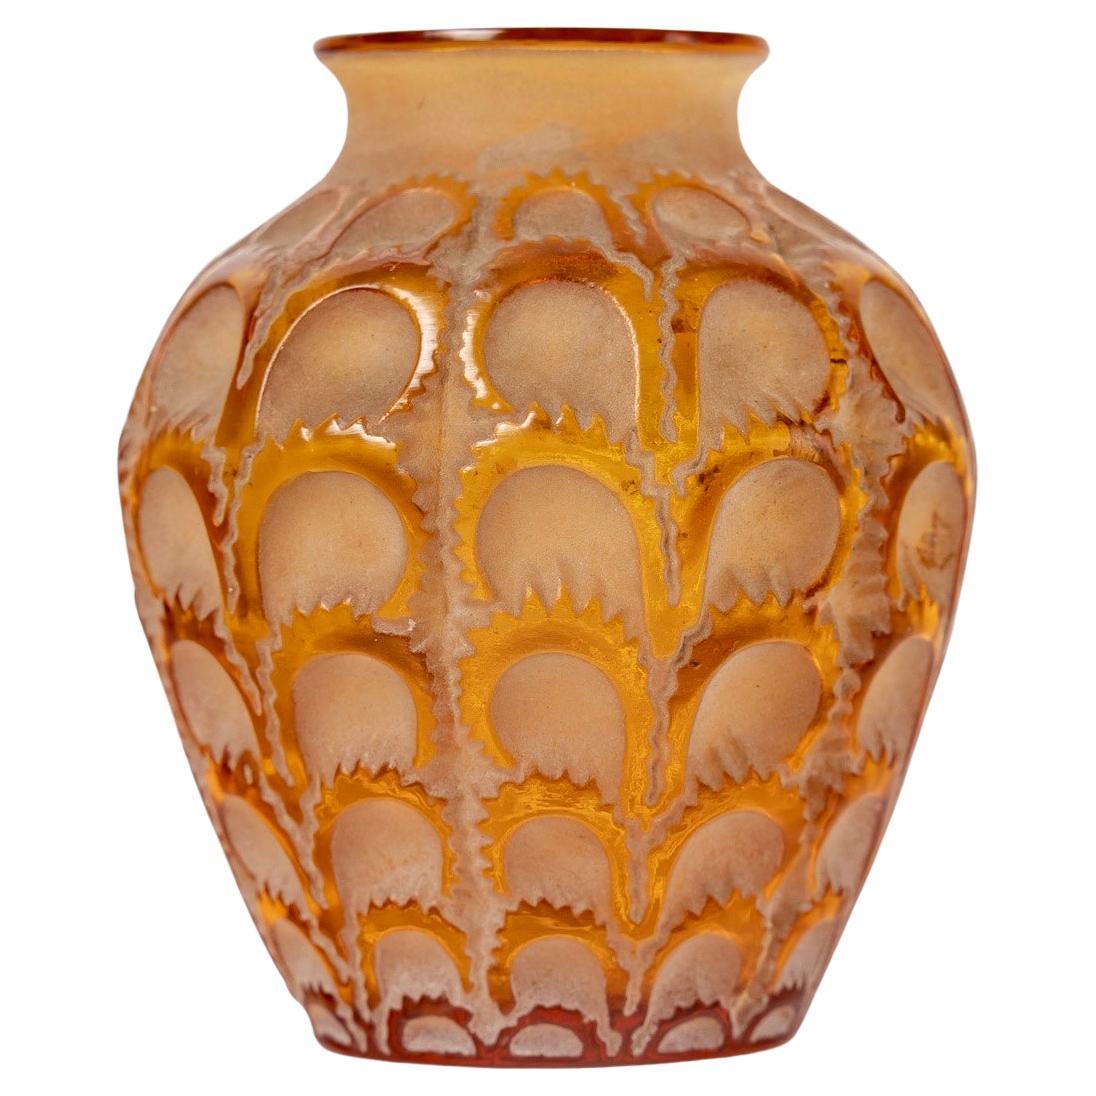 1931 René Lalique - Vase Laiterons Amber Yellow Glass with Beige Patina